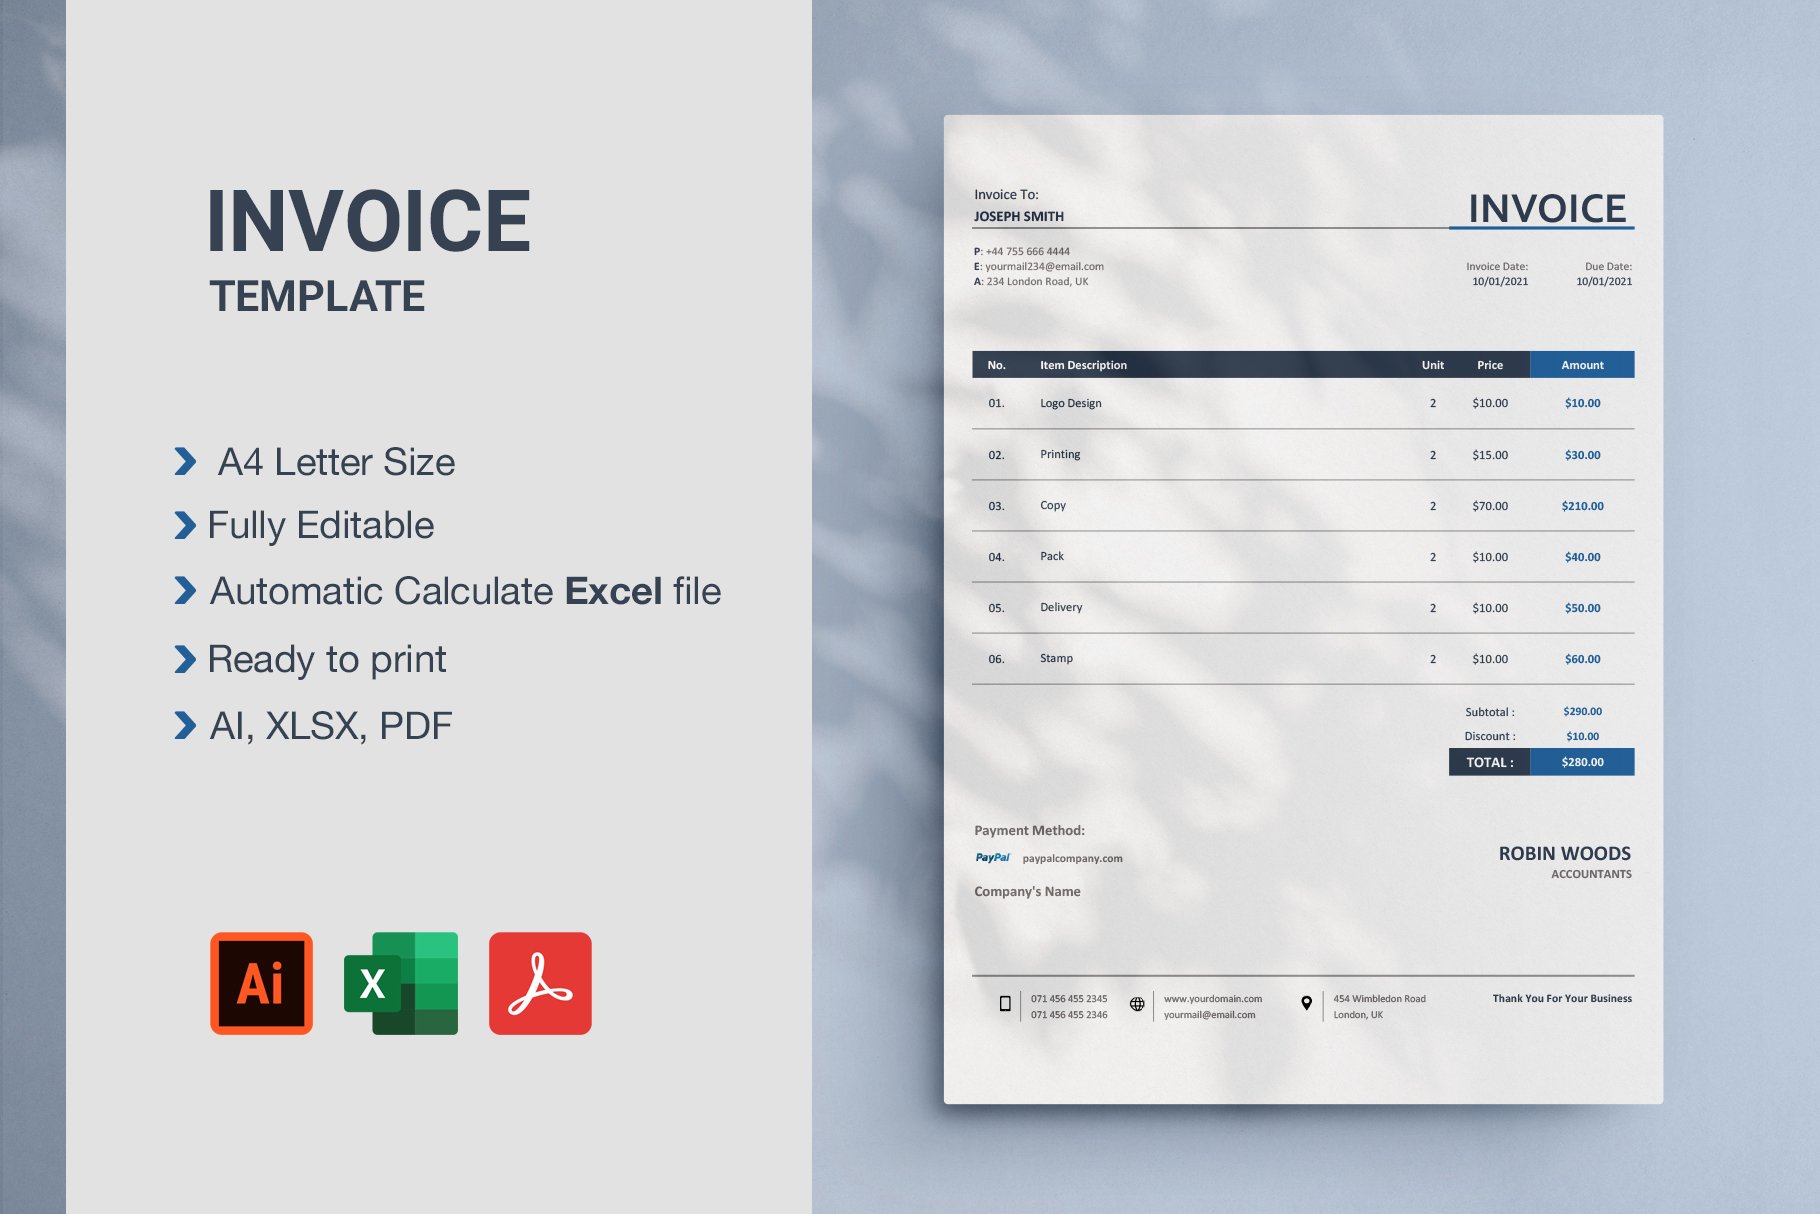 Minimal Invoice Template cover image.